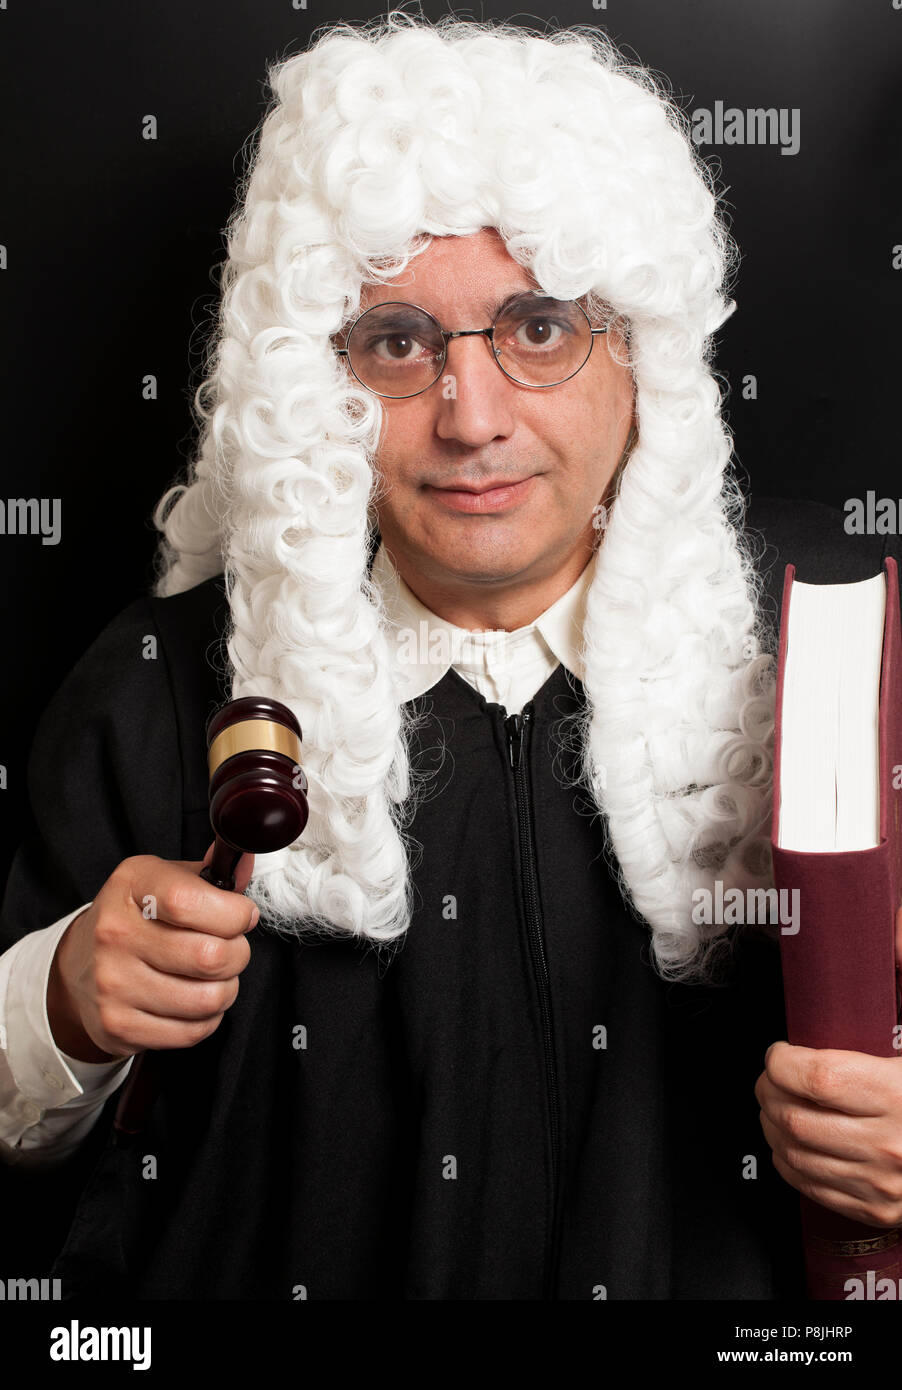 Portrait Of Male Lawyer Holding Judge Gavel And Book on black Stock Photo